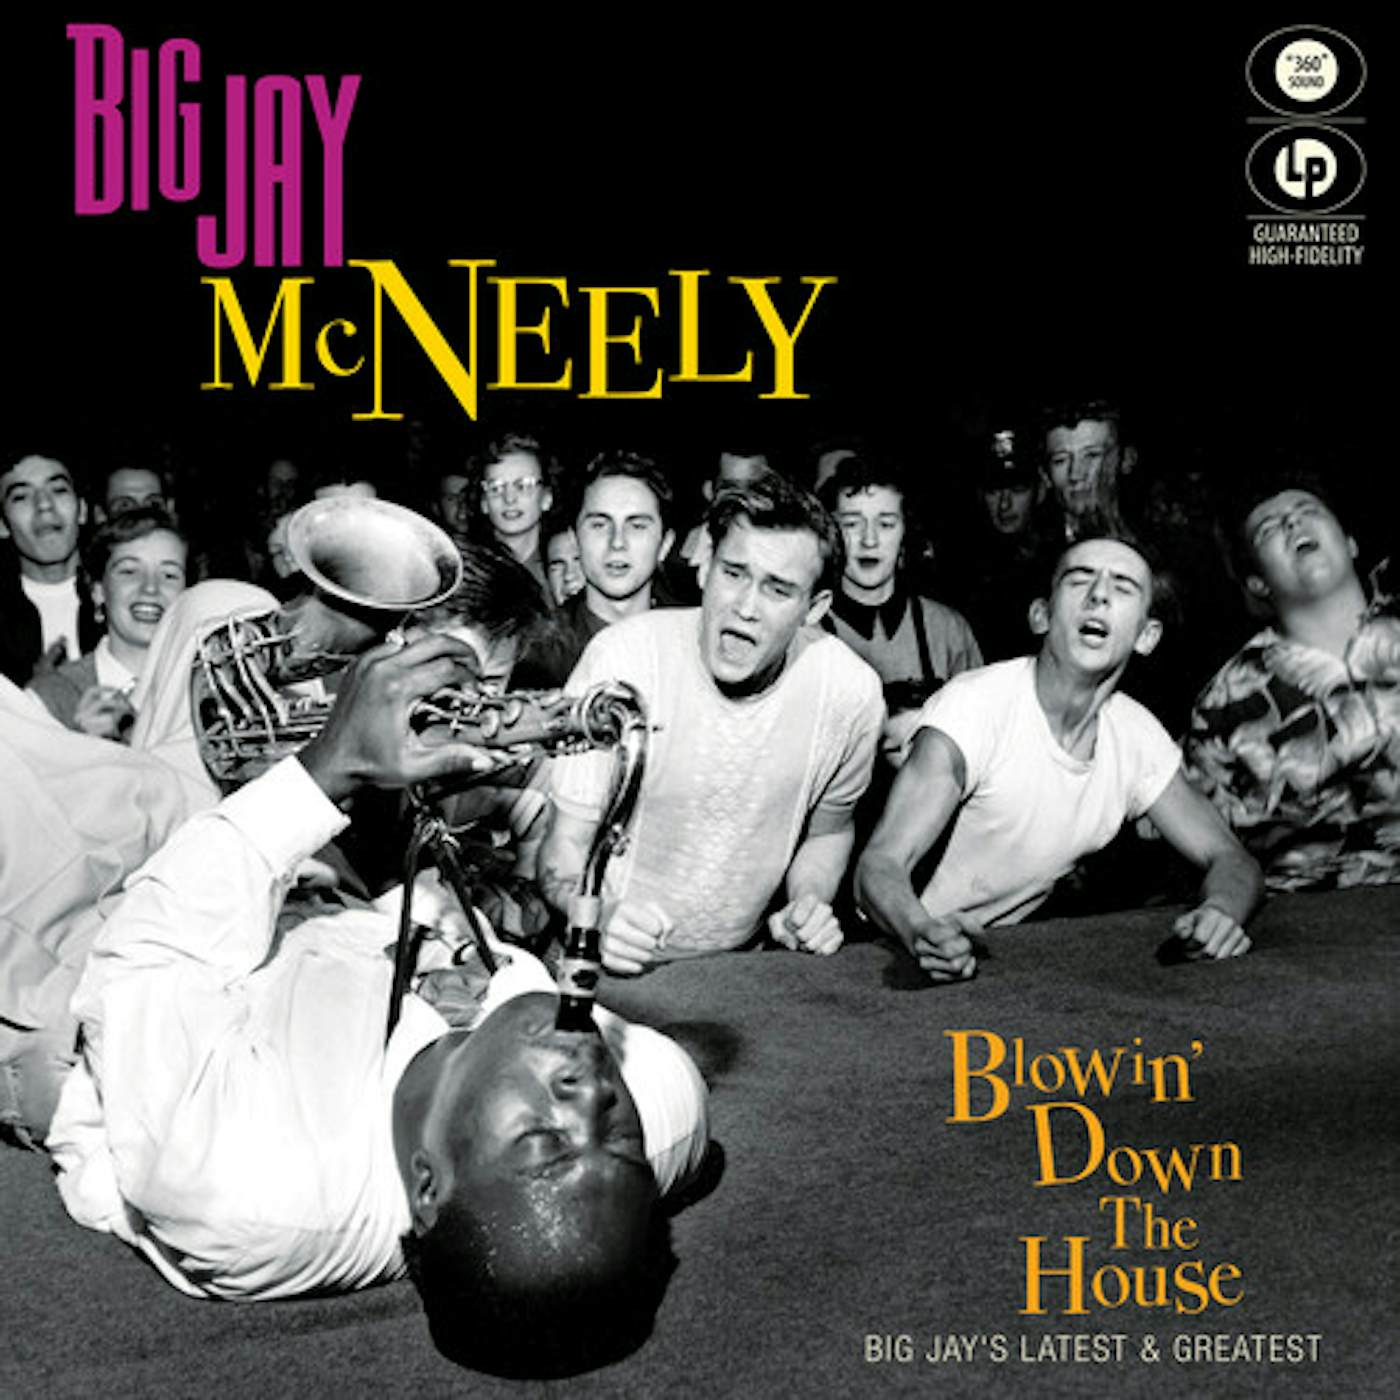 Big Jay McNeely BLOWIN' DOWN THE HOUSE - BIG JAY'S LATEST Vinyl Record